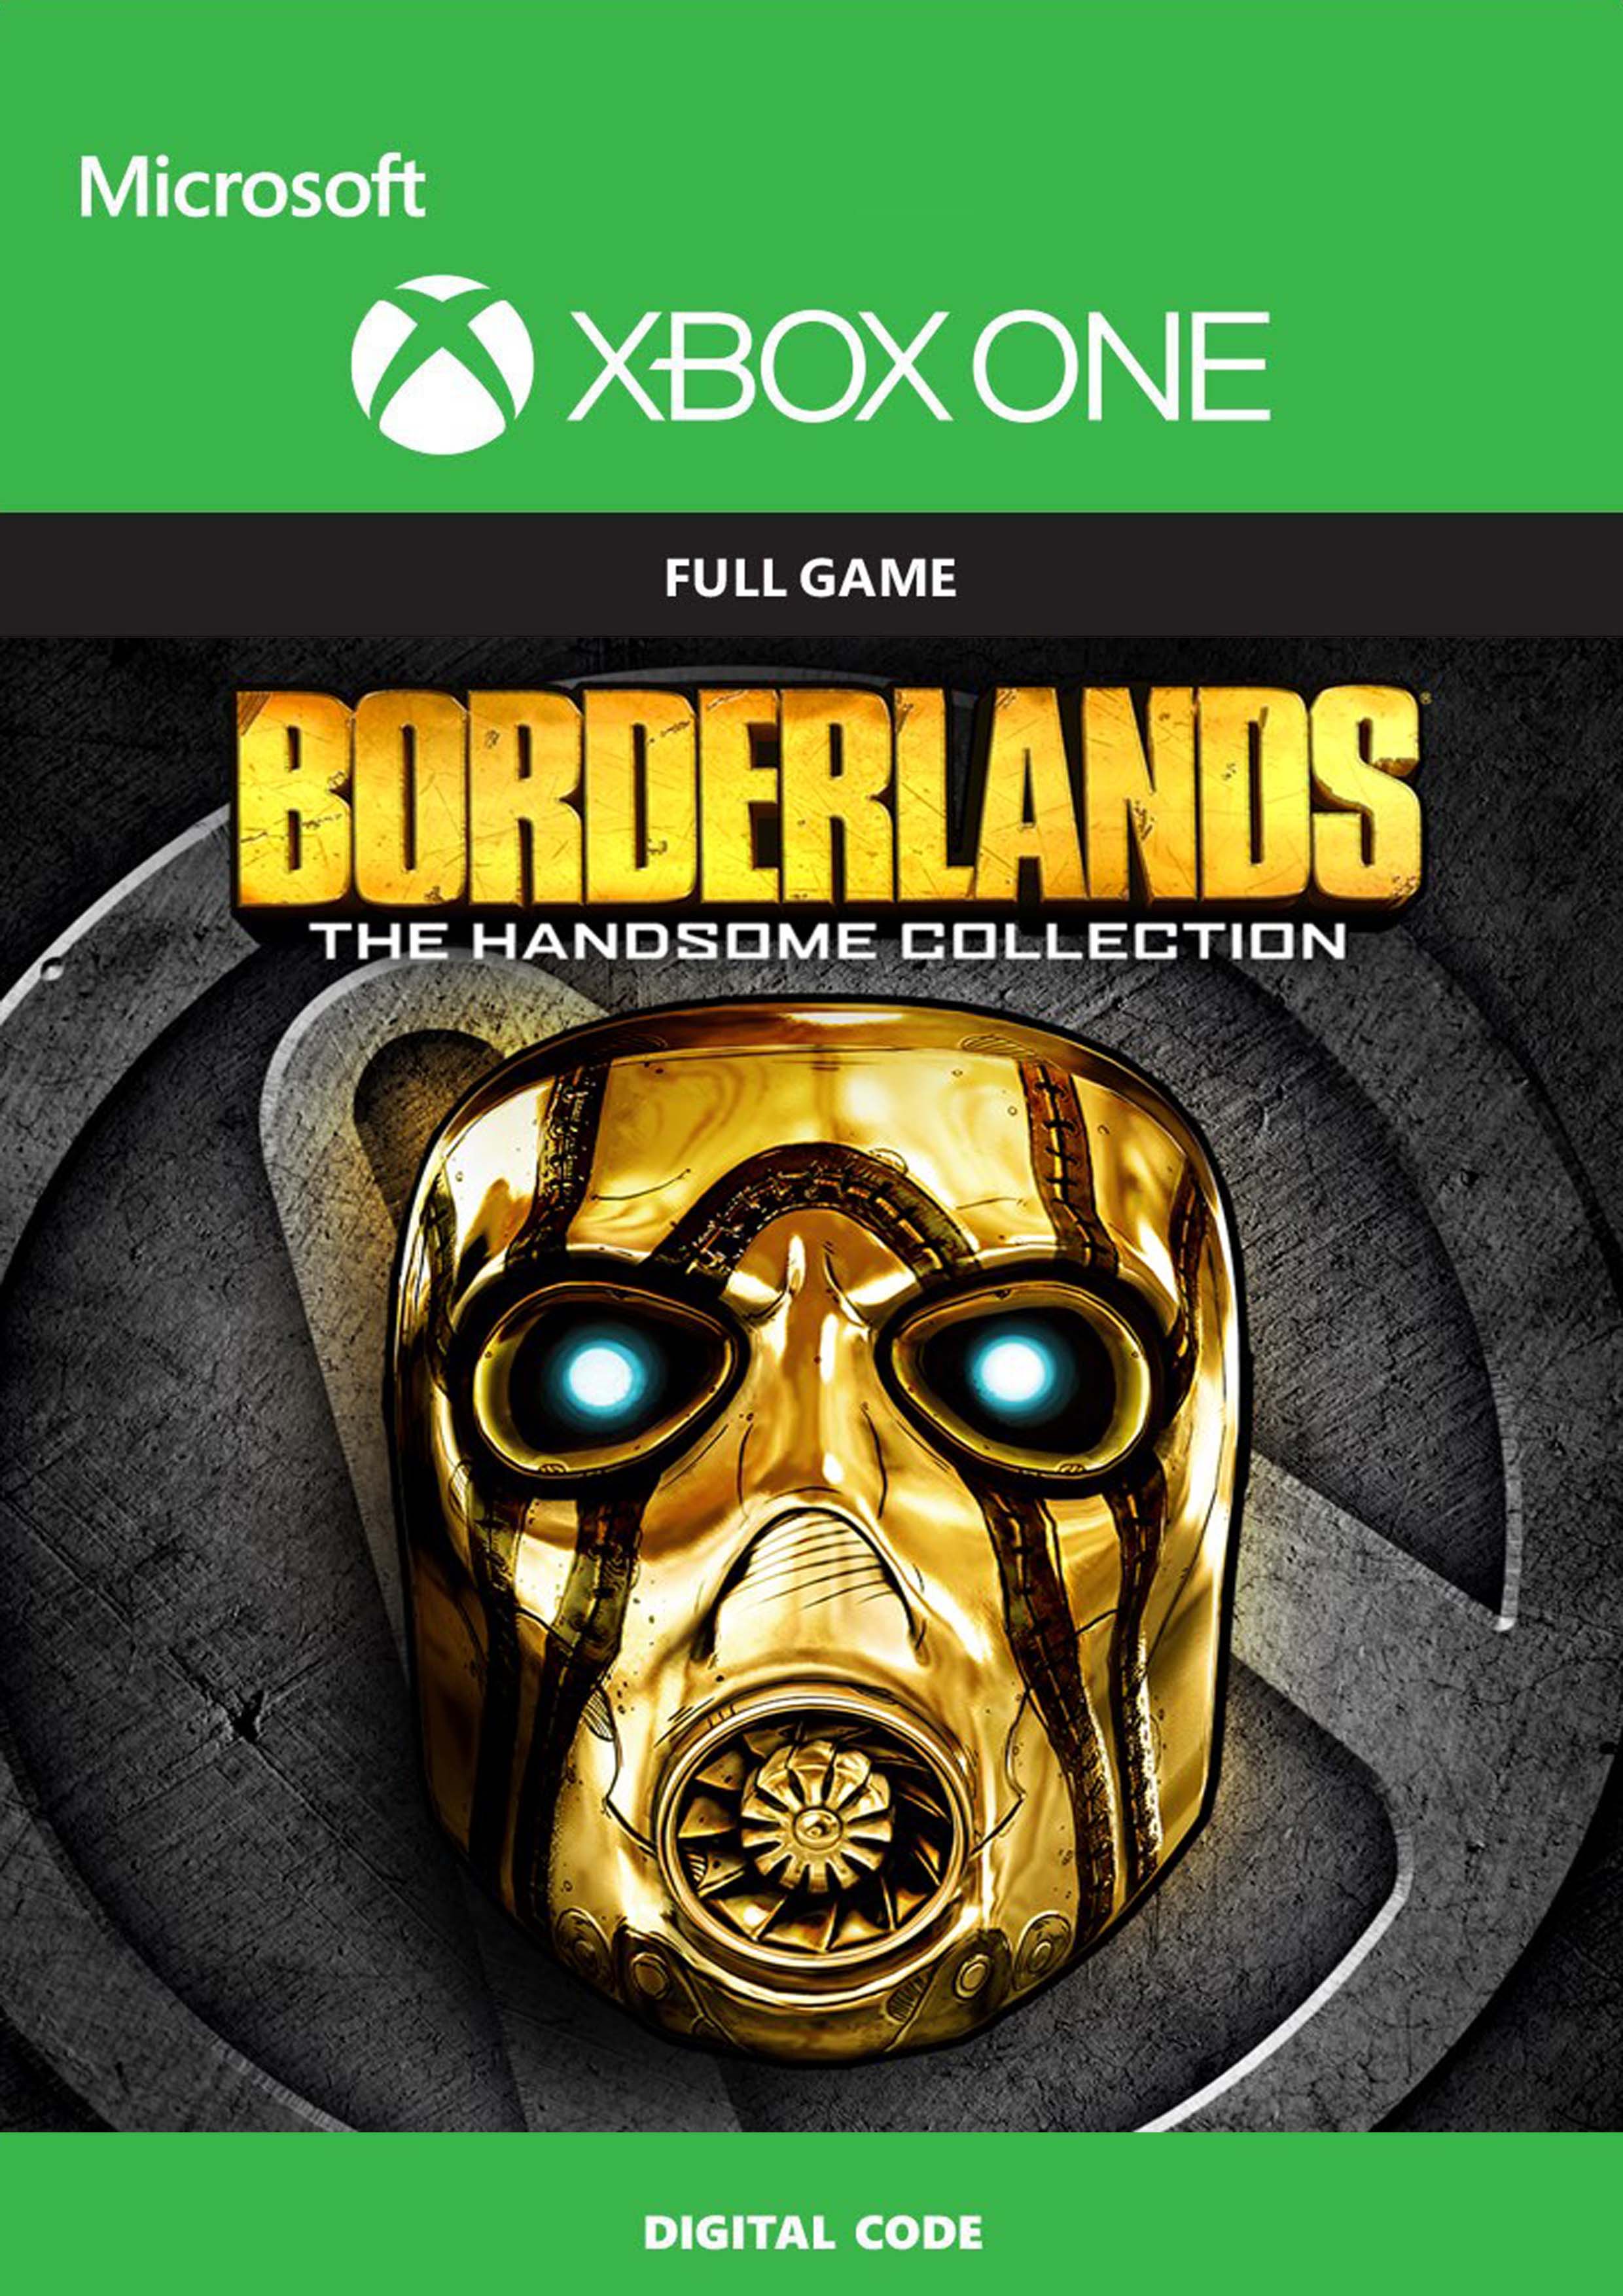 The handsome collection. Borderlands: the handsome collection. Borderlands the handsome collection Xbox. Borderlands: the handsome collection 480₽. Borderlands the handsome collection Cover Xbox.